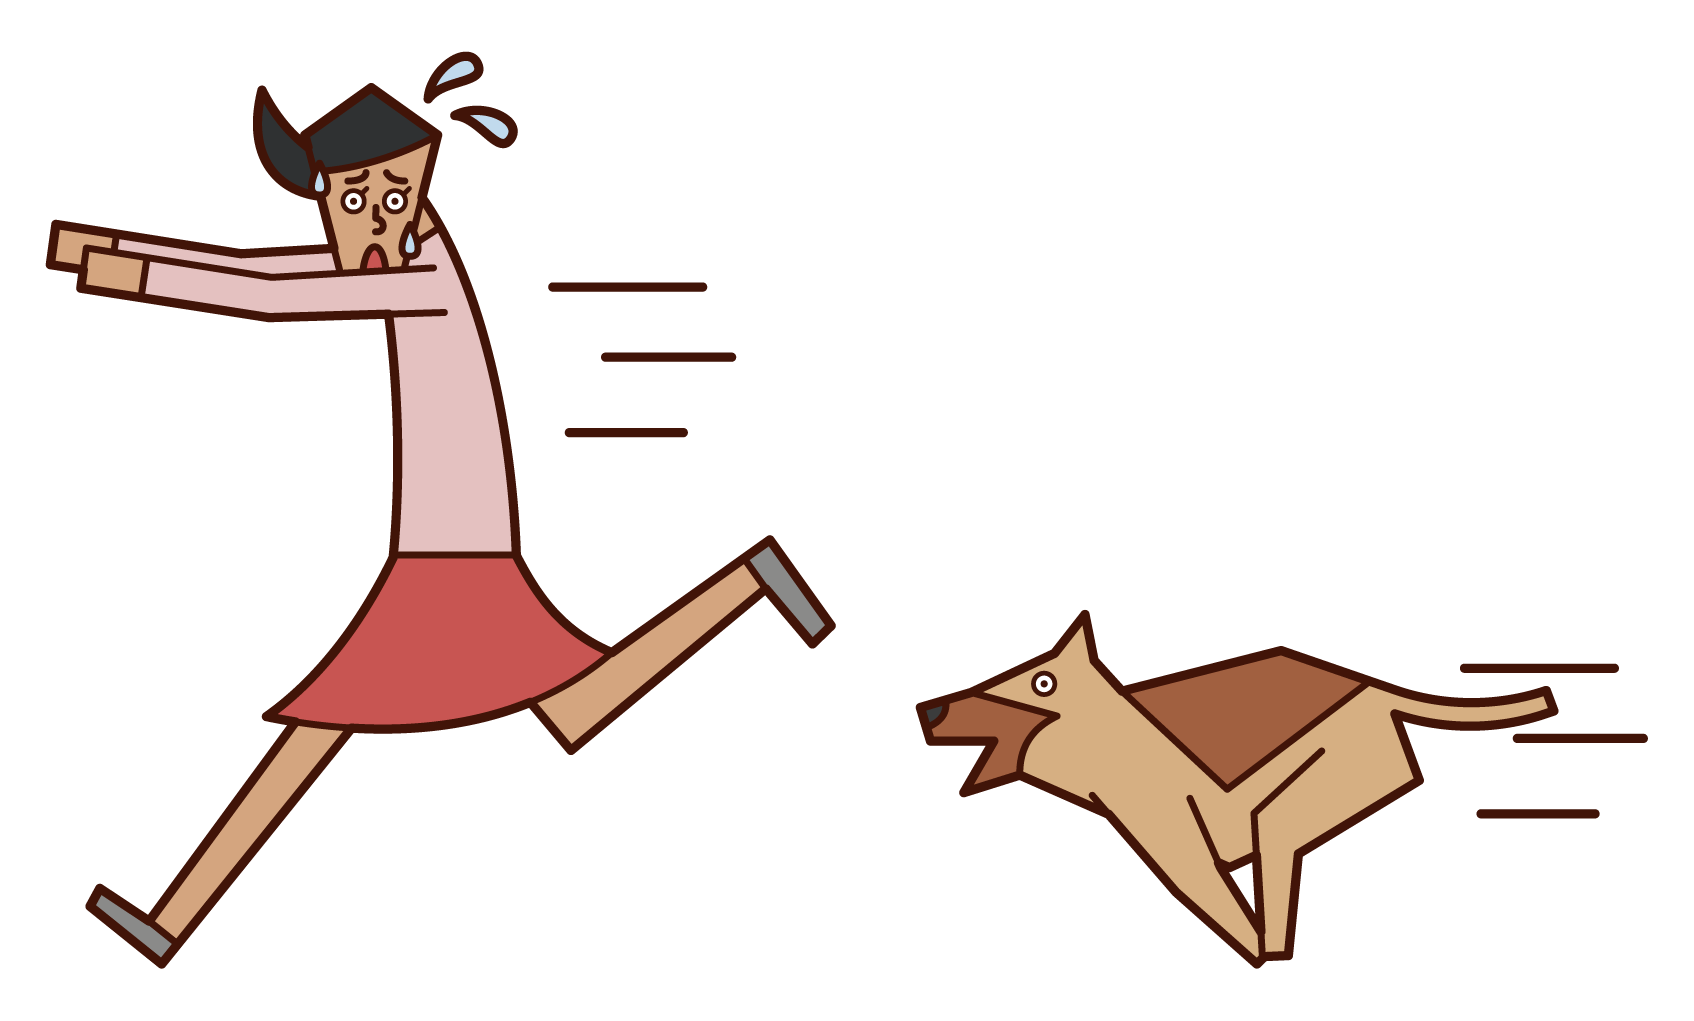 Illustration of a woman who runs away after being chased by a dog